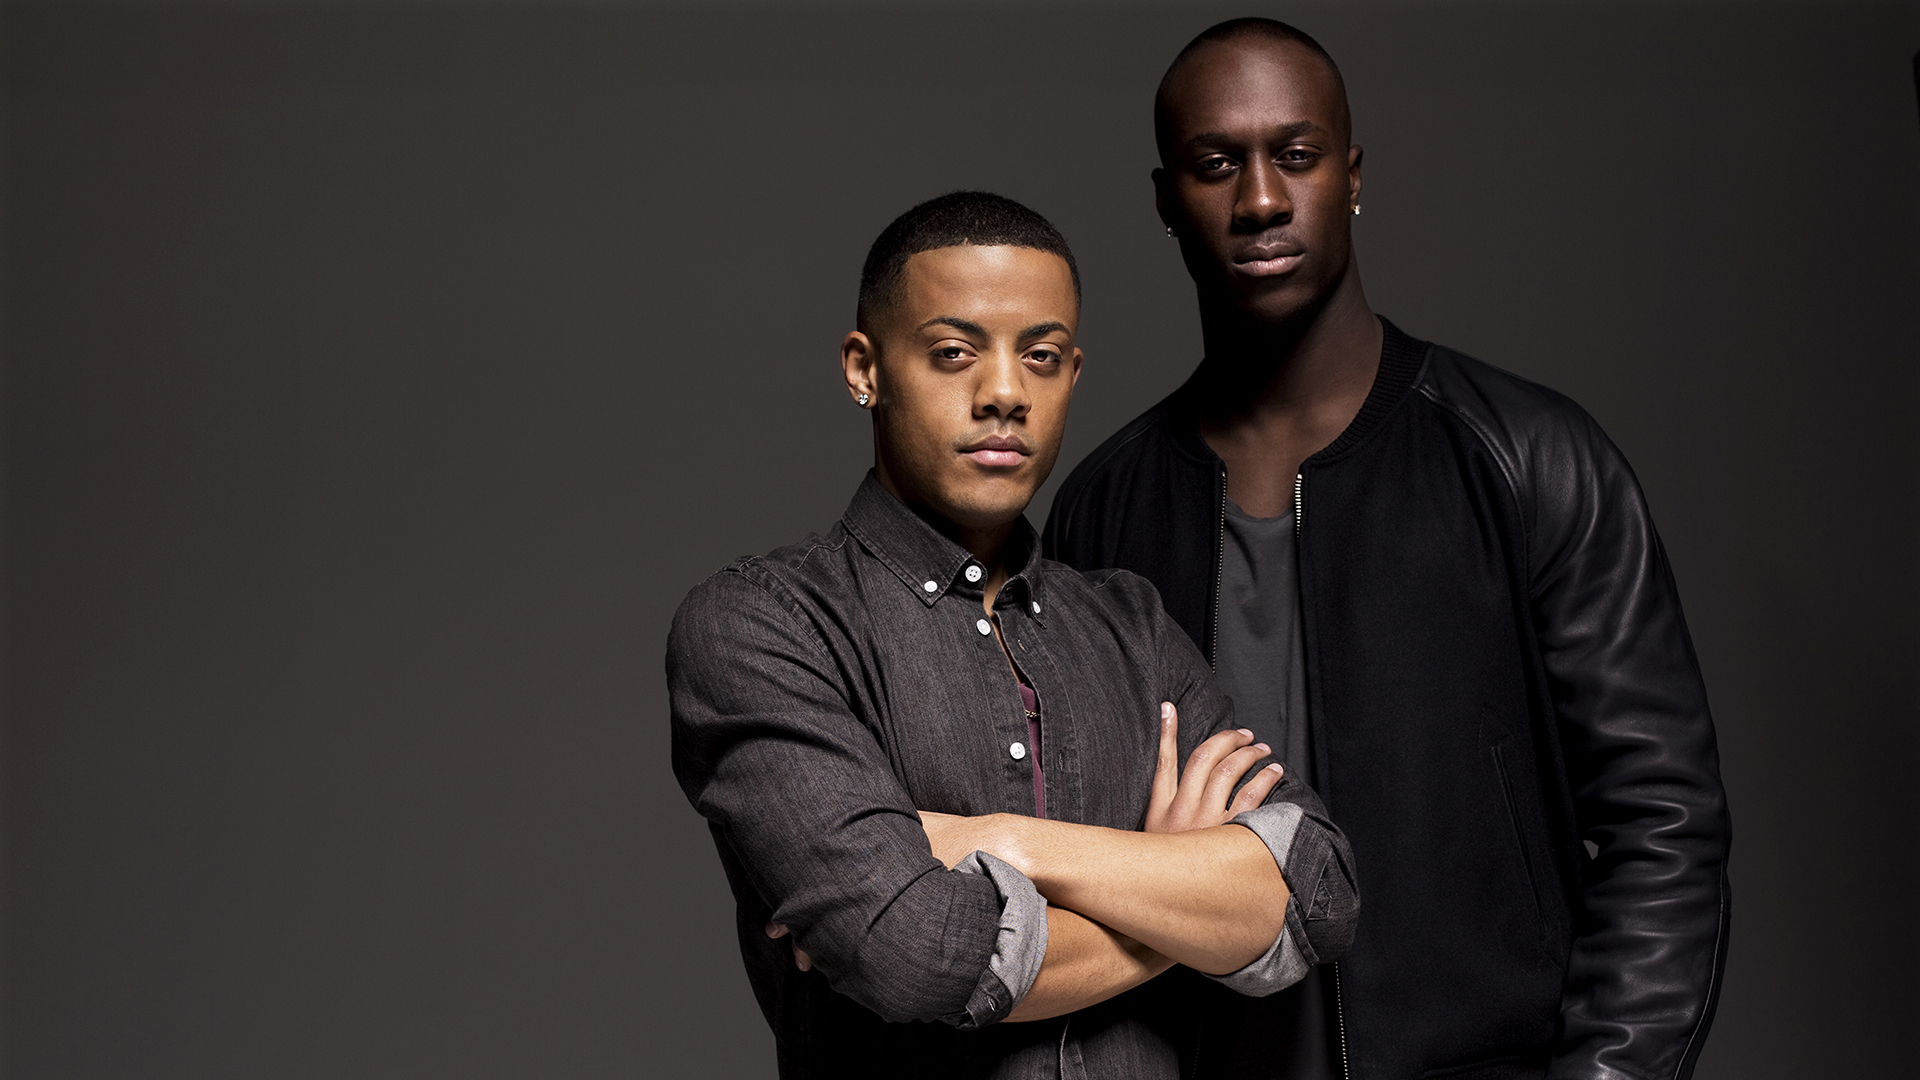 When The Day Comes av Nico And Vinz